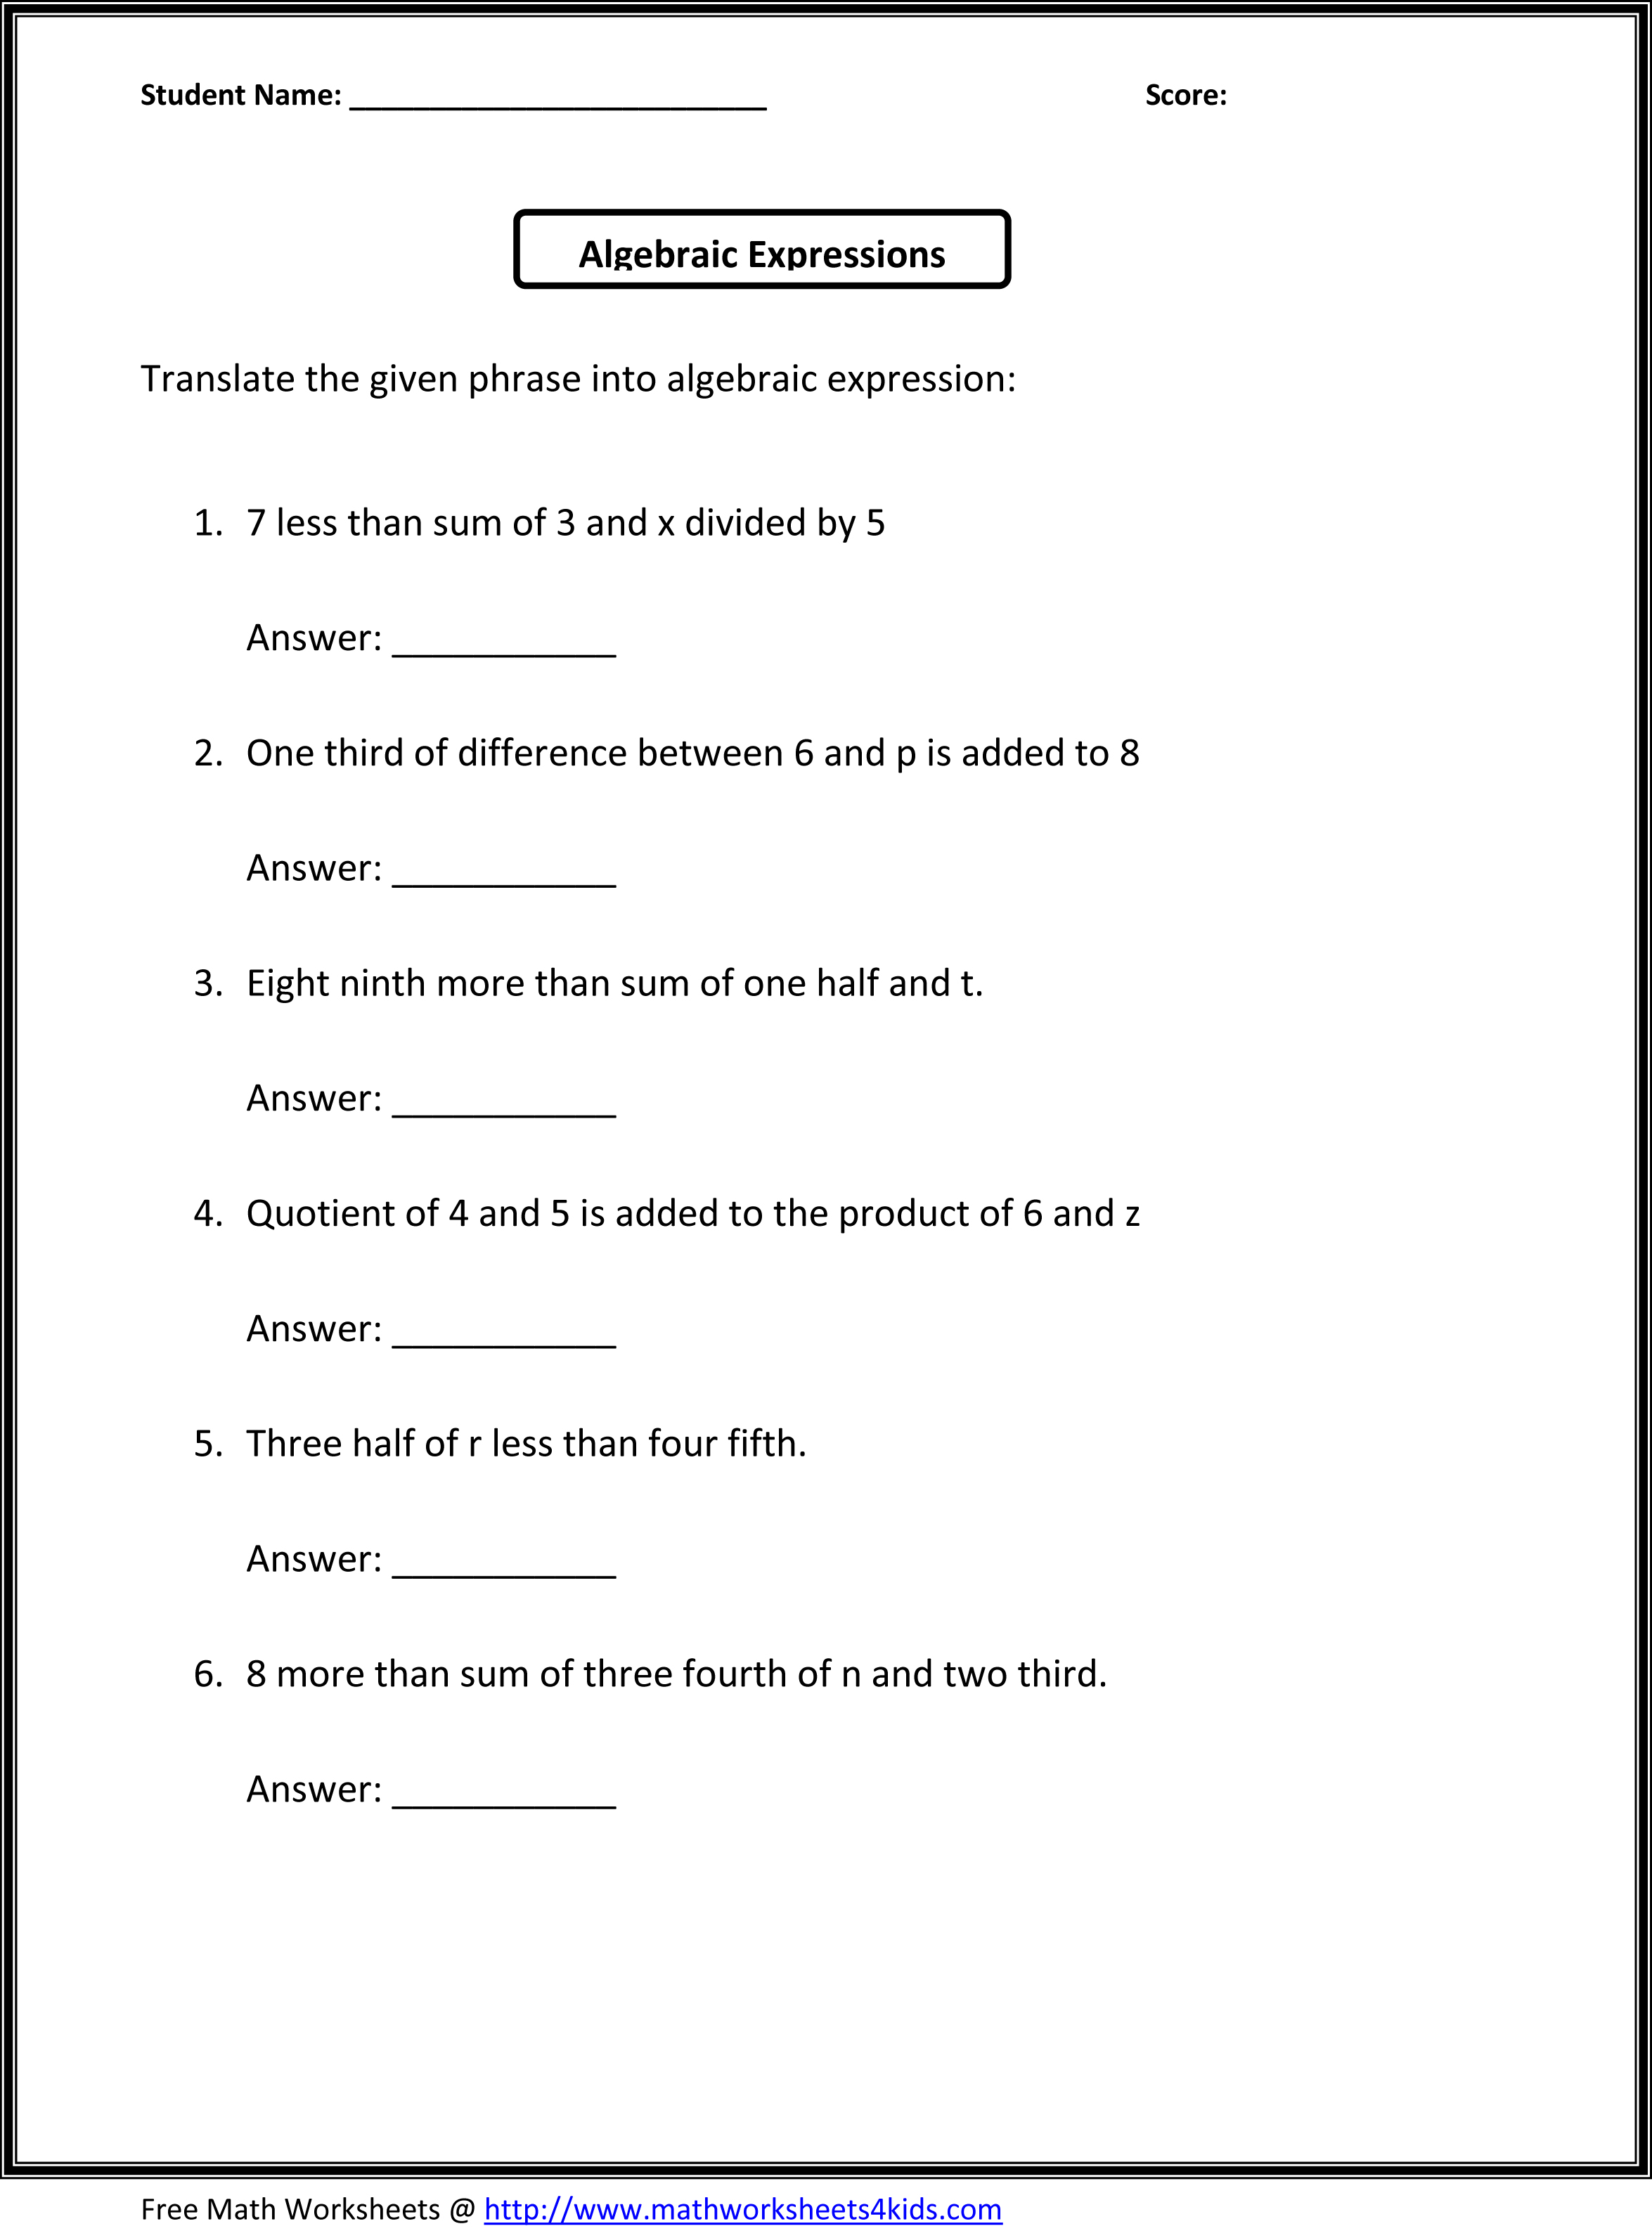 algebraic-expressions-and-equations-worksheet